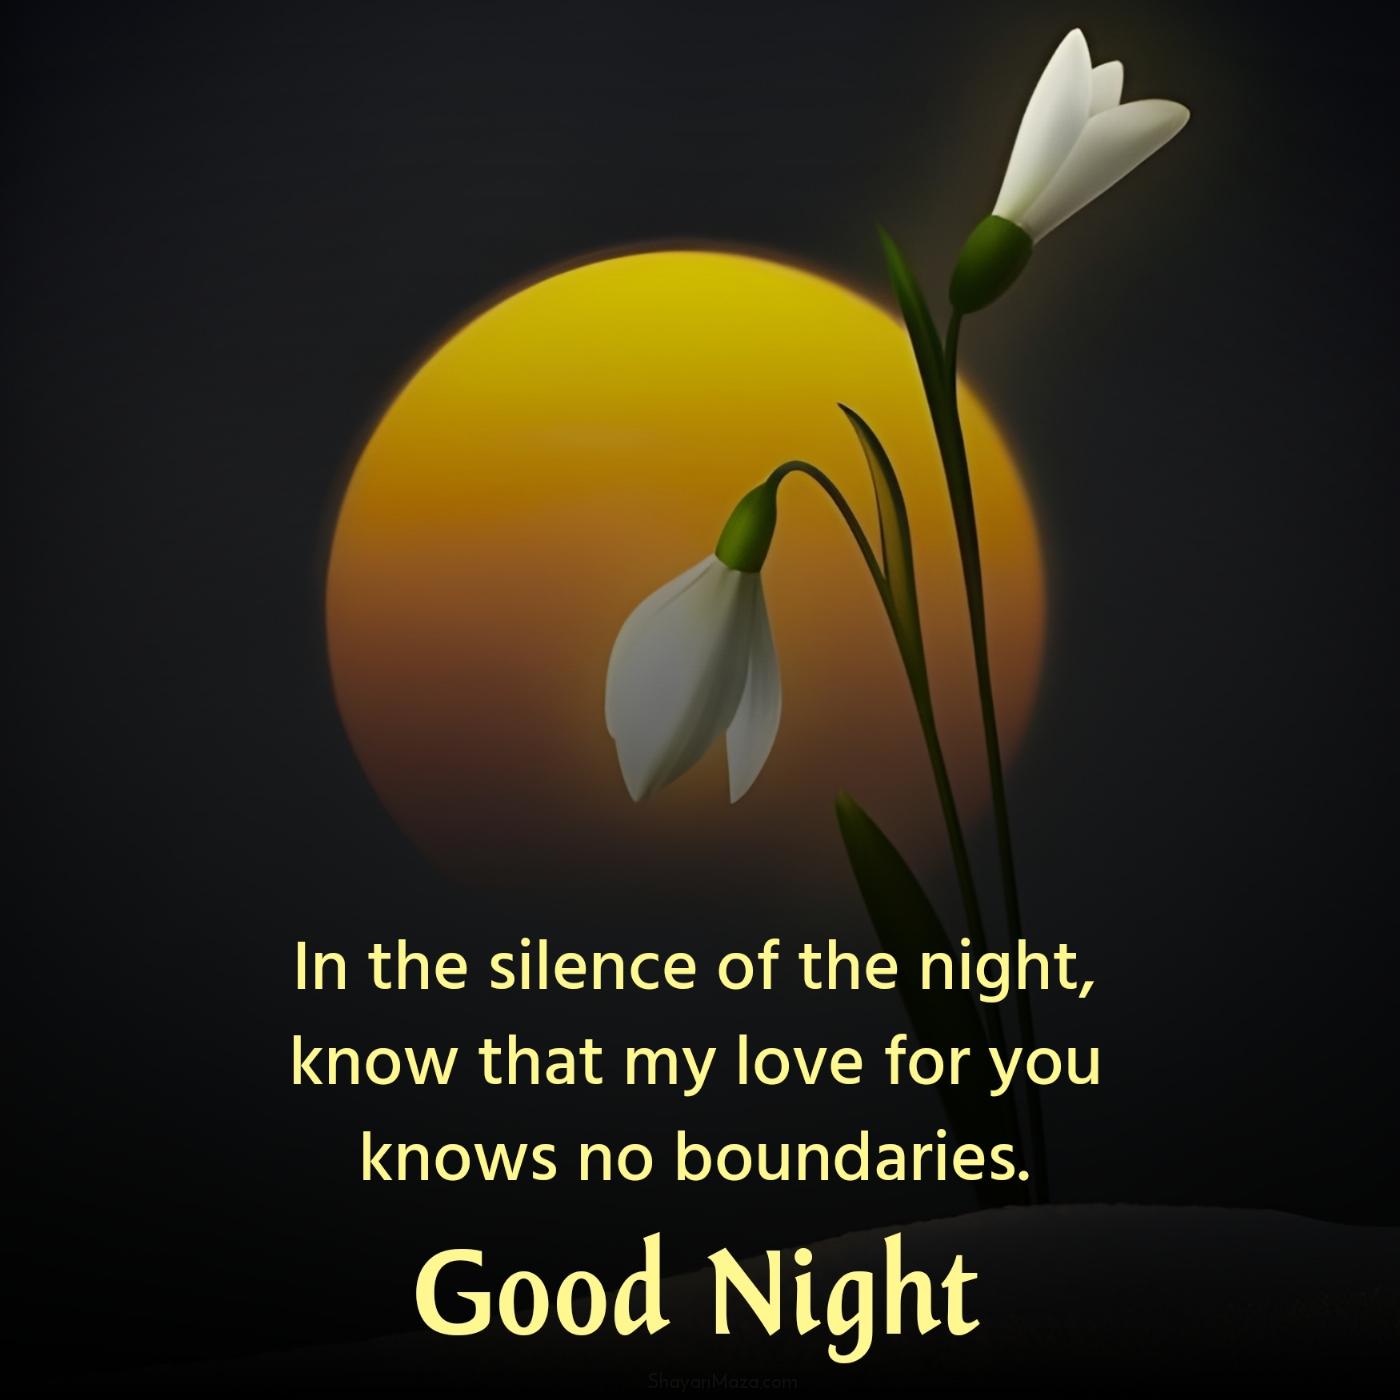 In the silence of the night know that my love for you